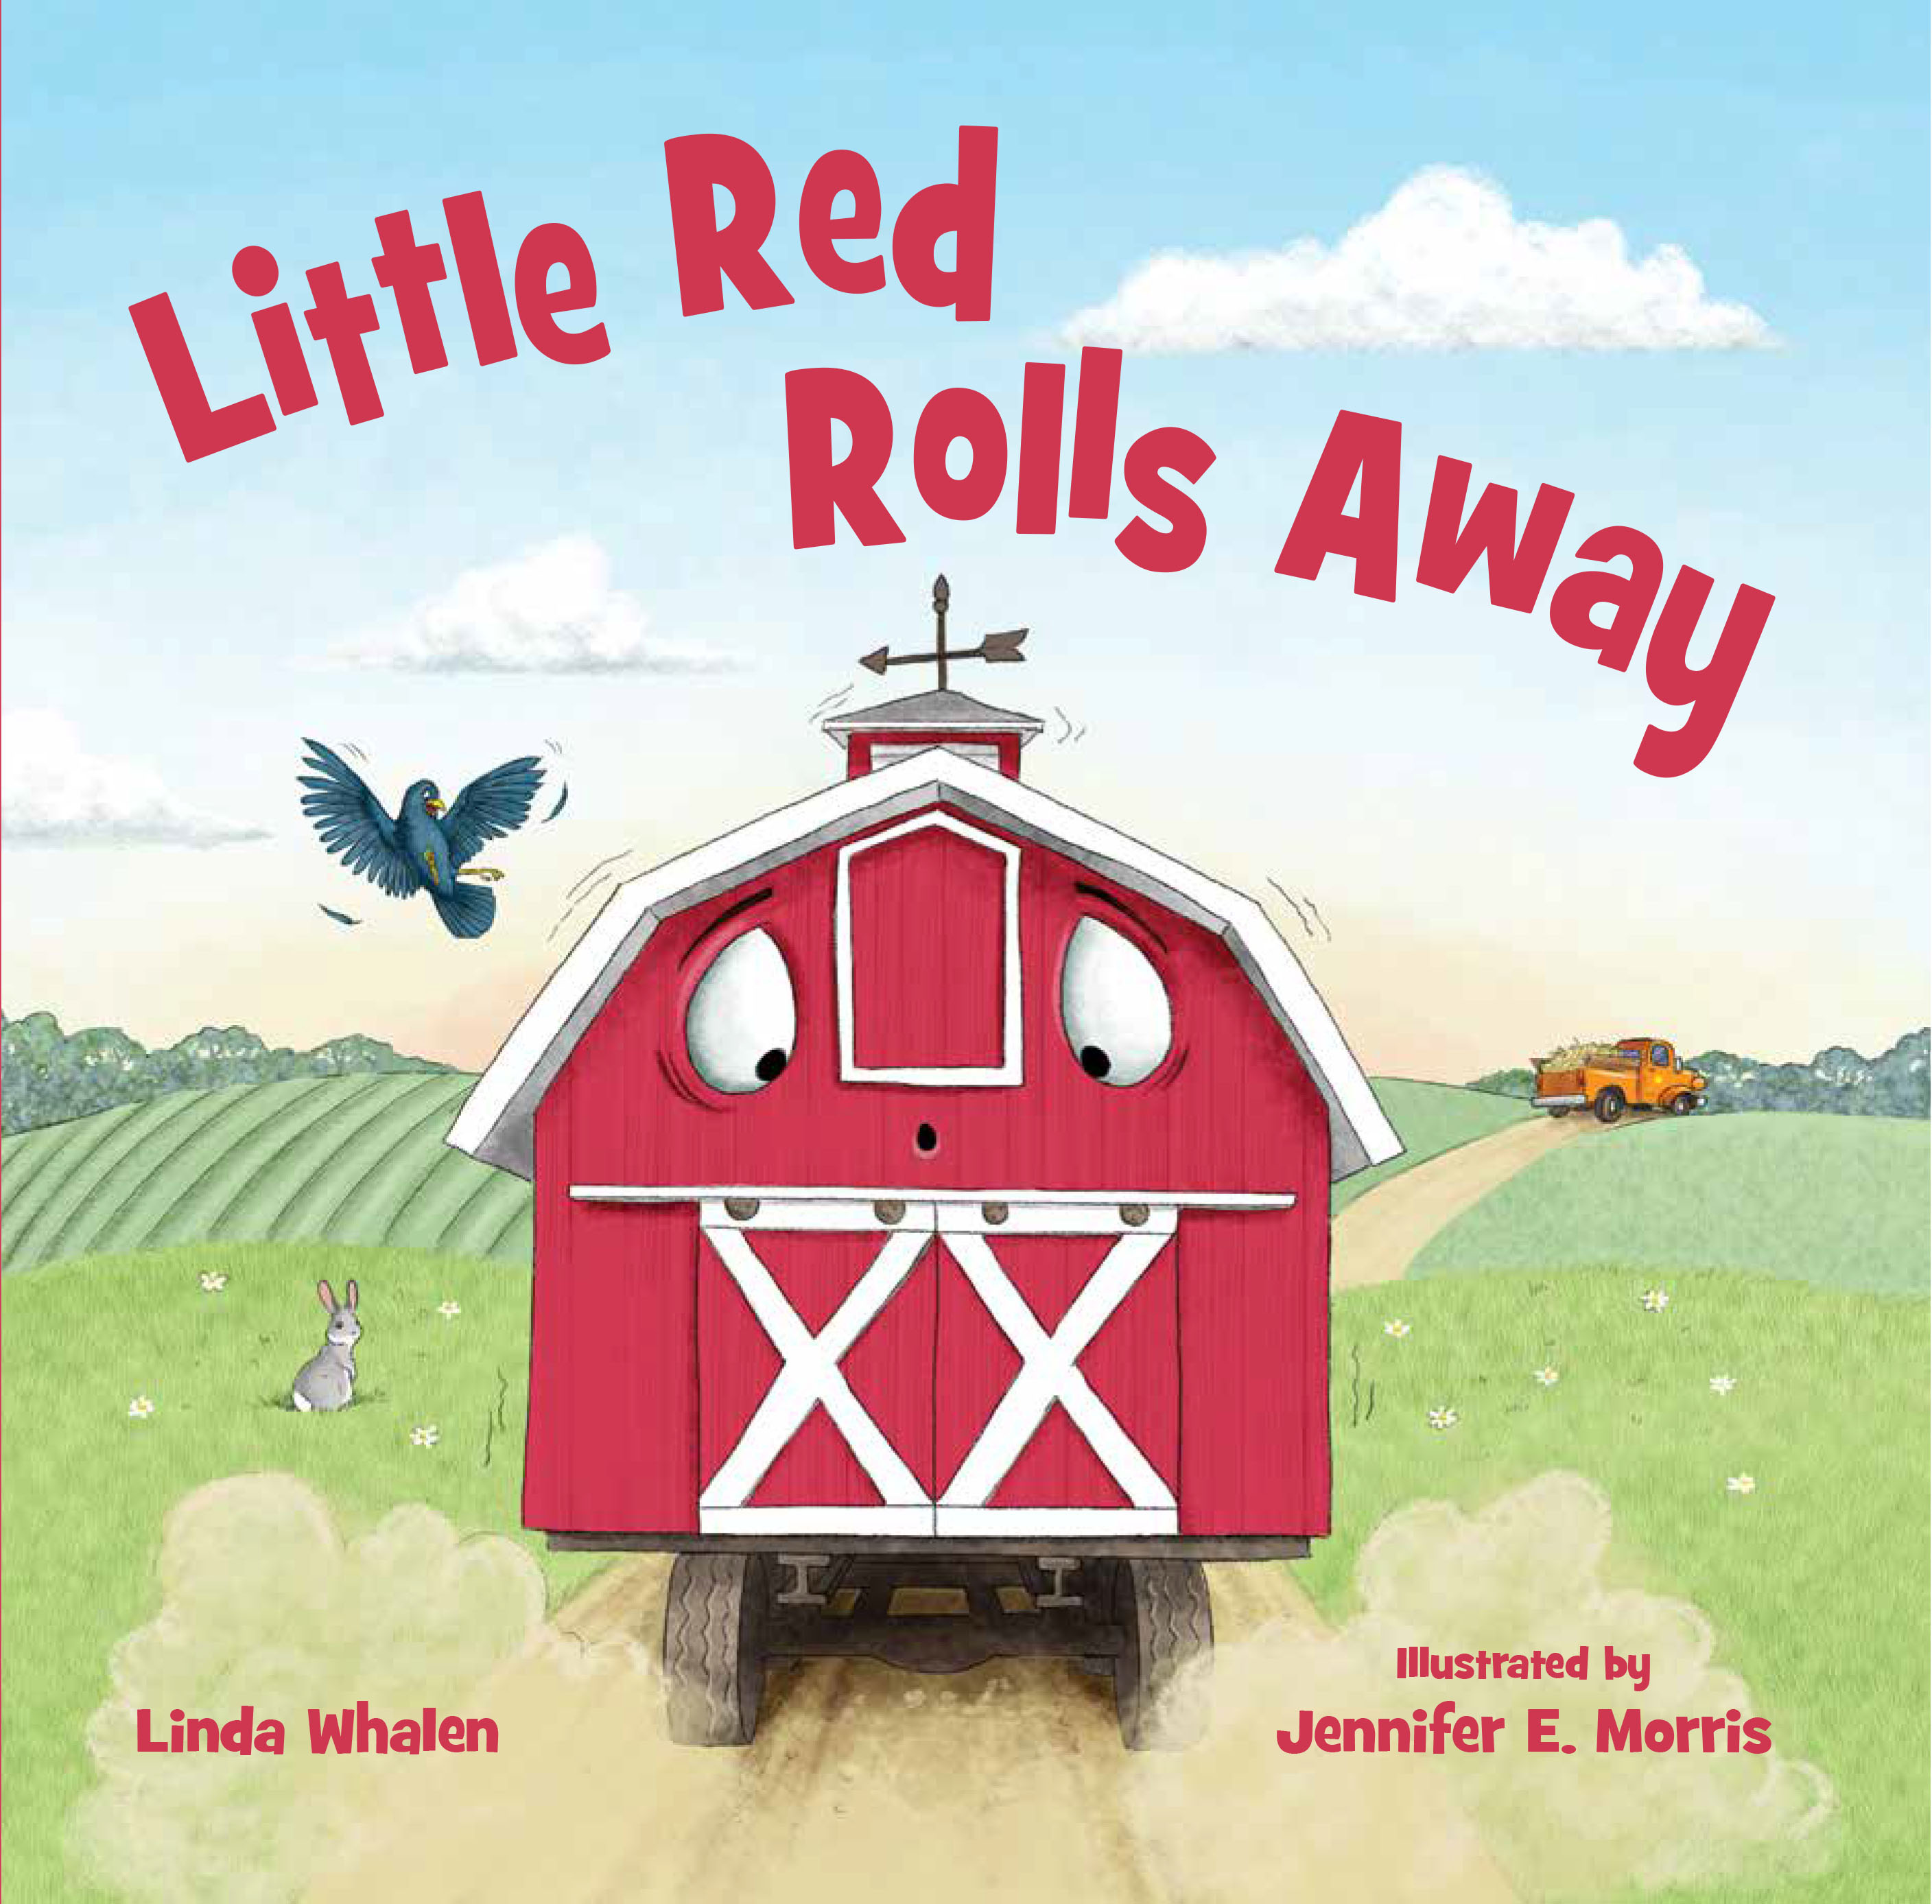 Red roll. Постер Roll away. Whalen. Roll and Red. Little Red Hen Carl and Mary Hauge.